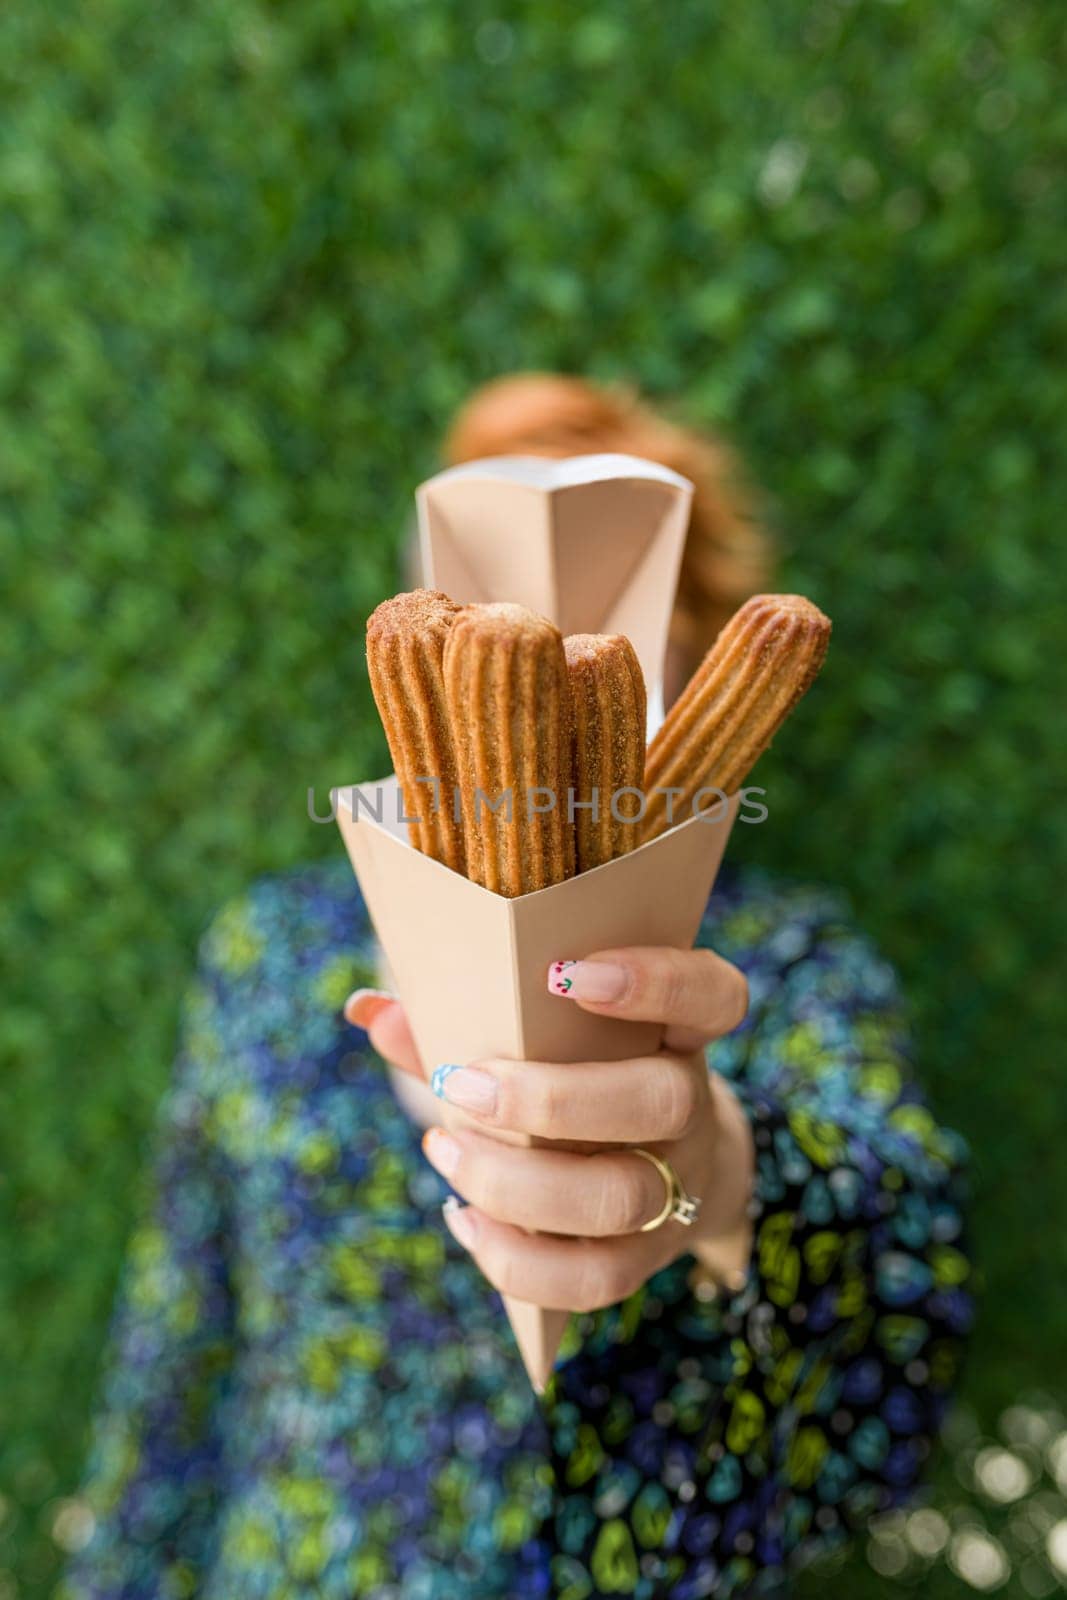 woman holding churros in cardboard box in front of green grass wall by Sonat